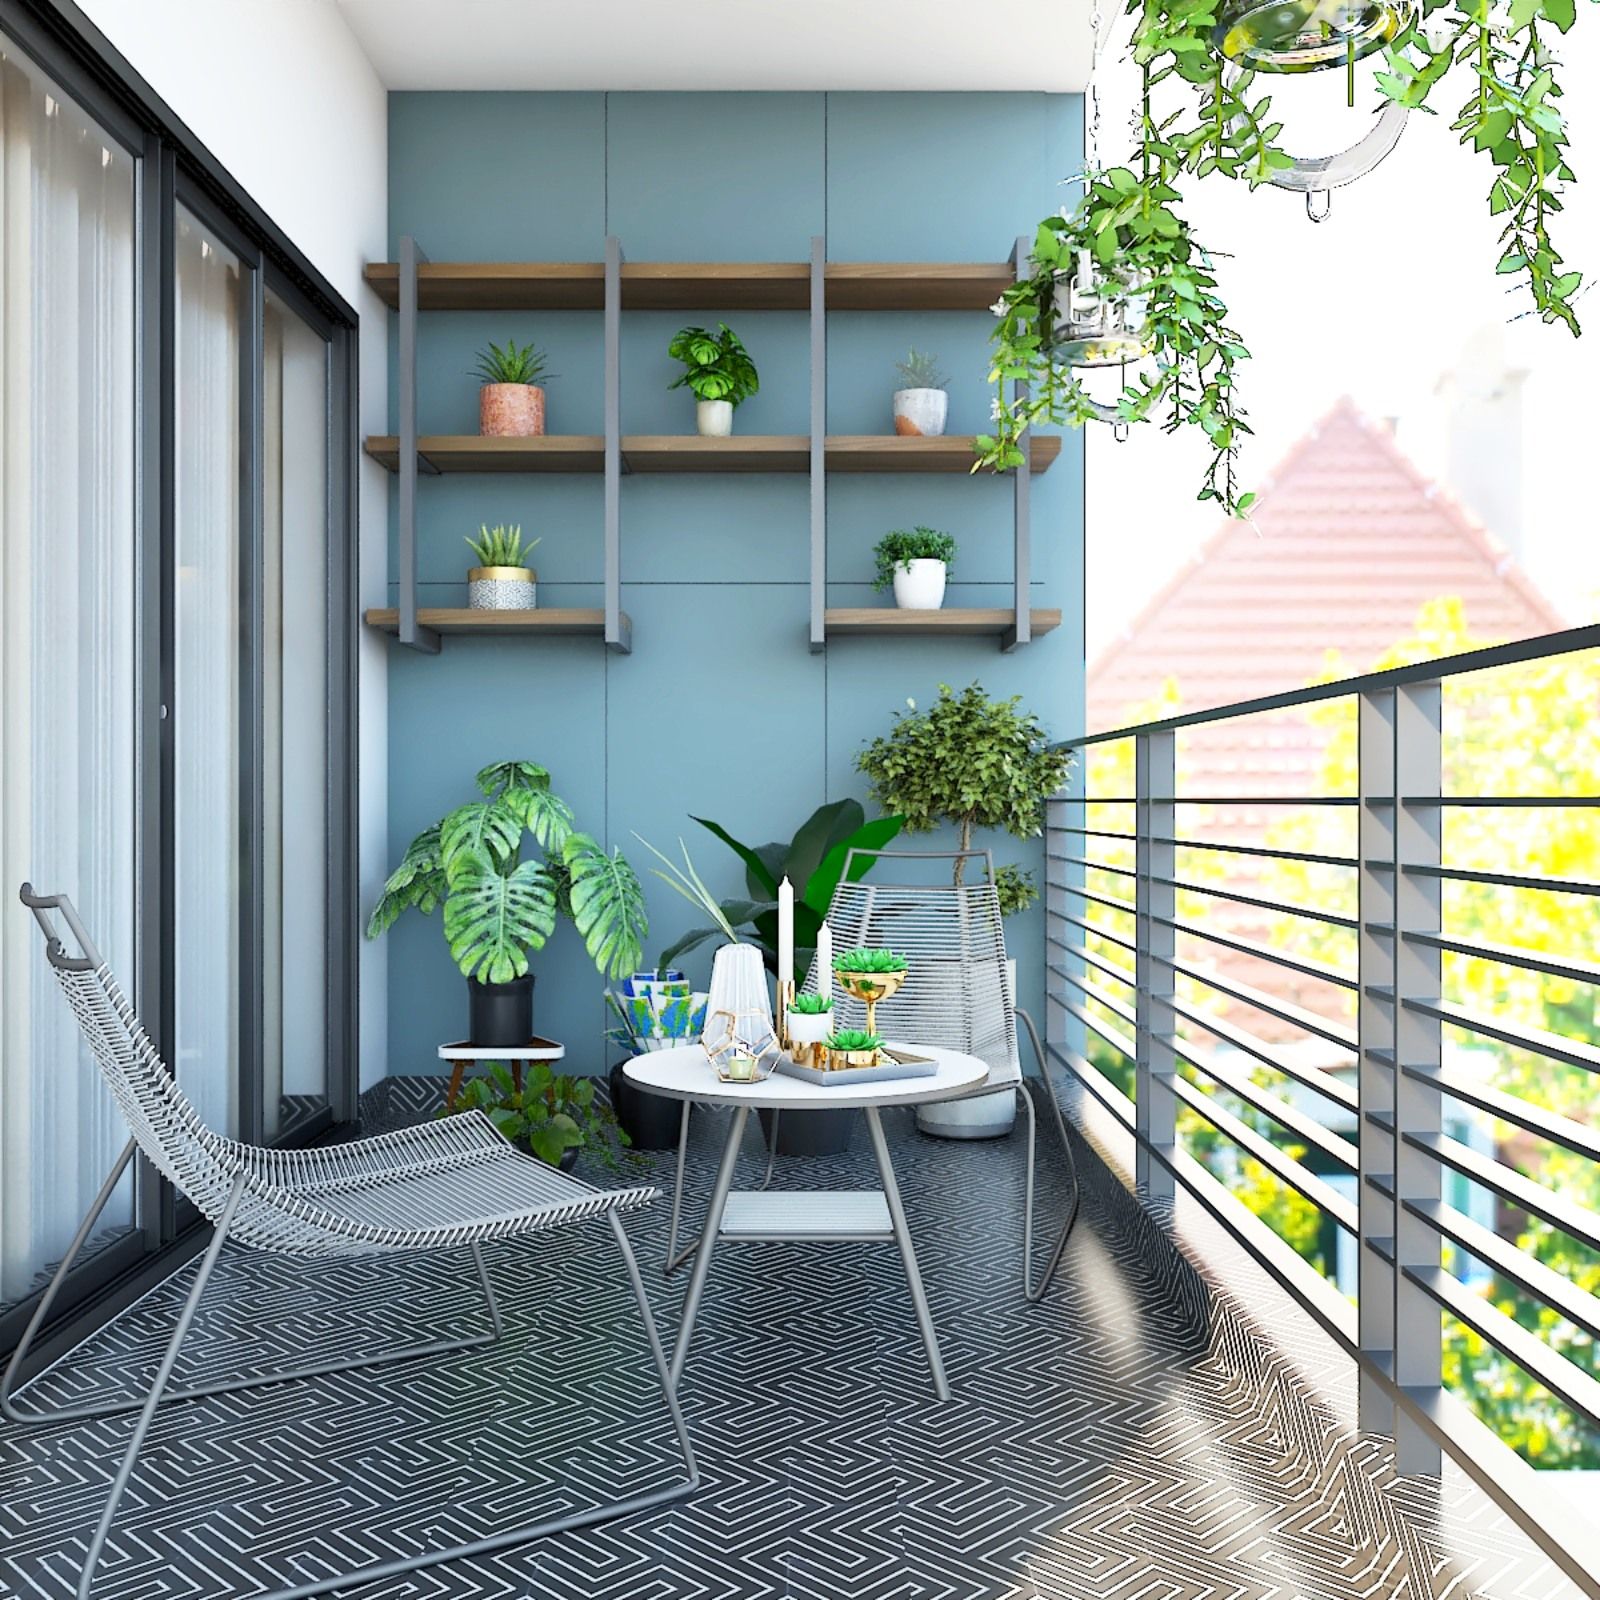 Contemporary Balcony Design with Blue Accent Wall and Stylish Furnishings